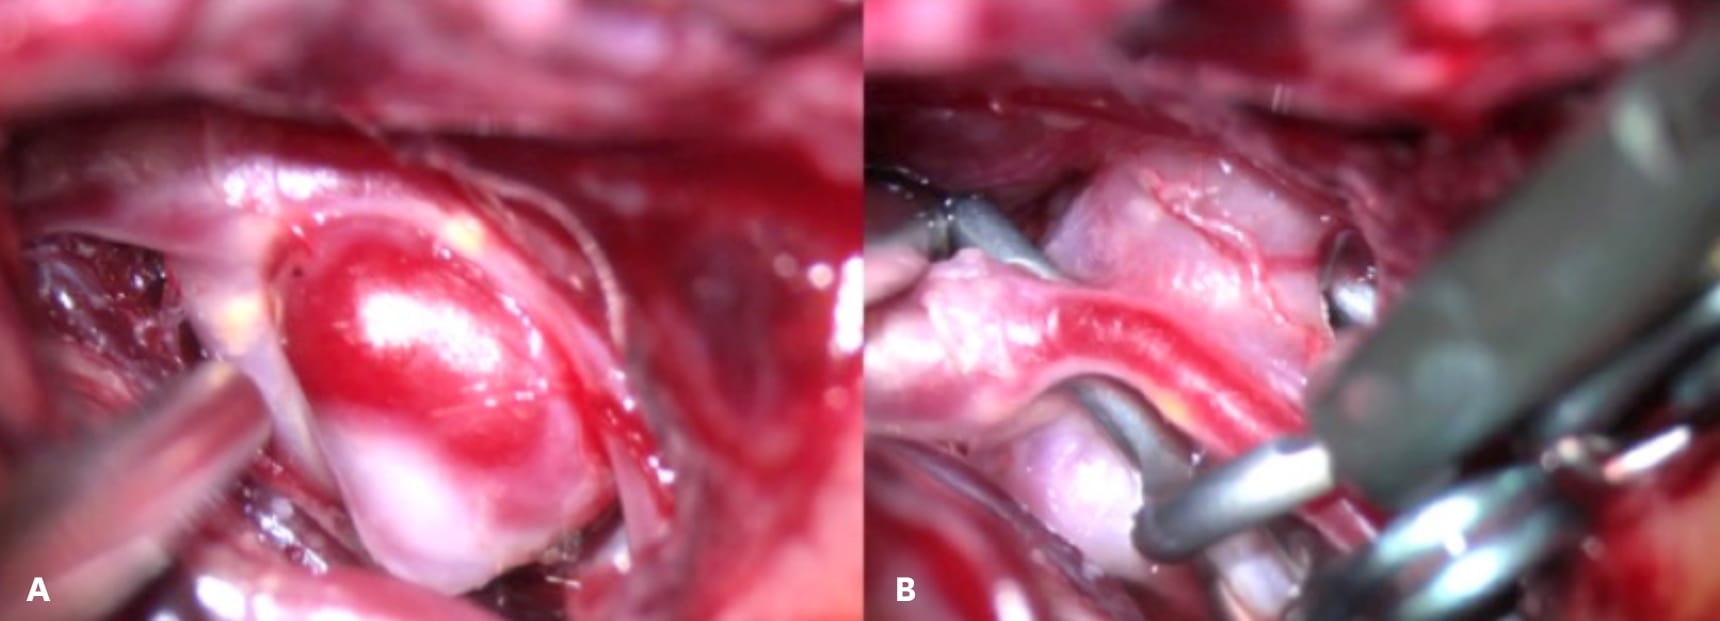 Figure 2 – (a) An intraoperative photo of an unruptured cerebral aneurysm prior to clipping. (b) An intraoperative photo of the same aneurysm during a complex clip reconstruction.